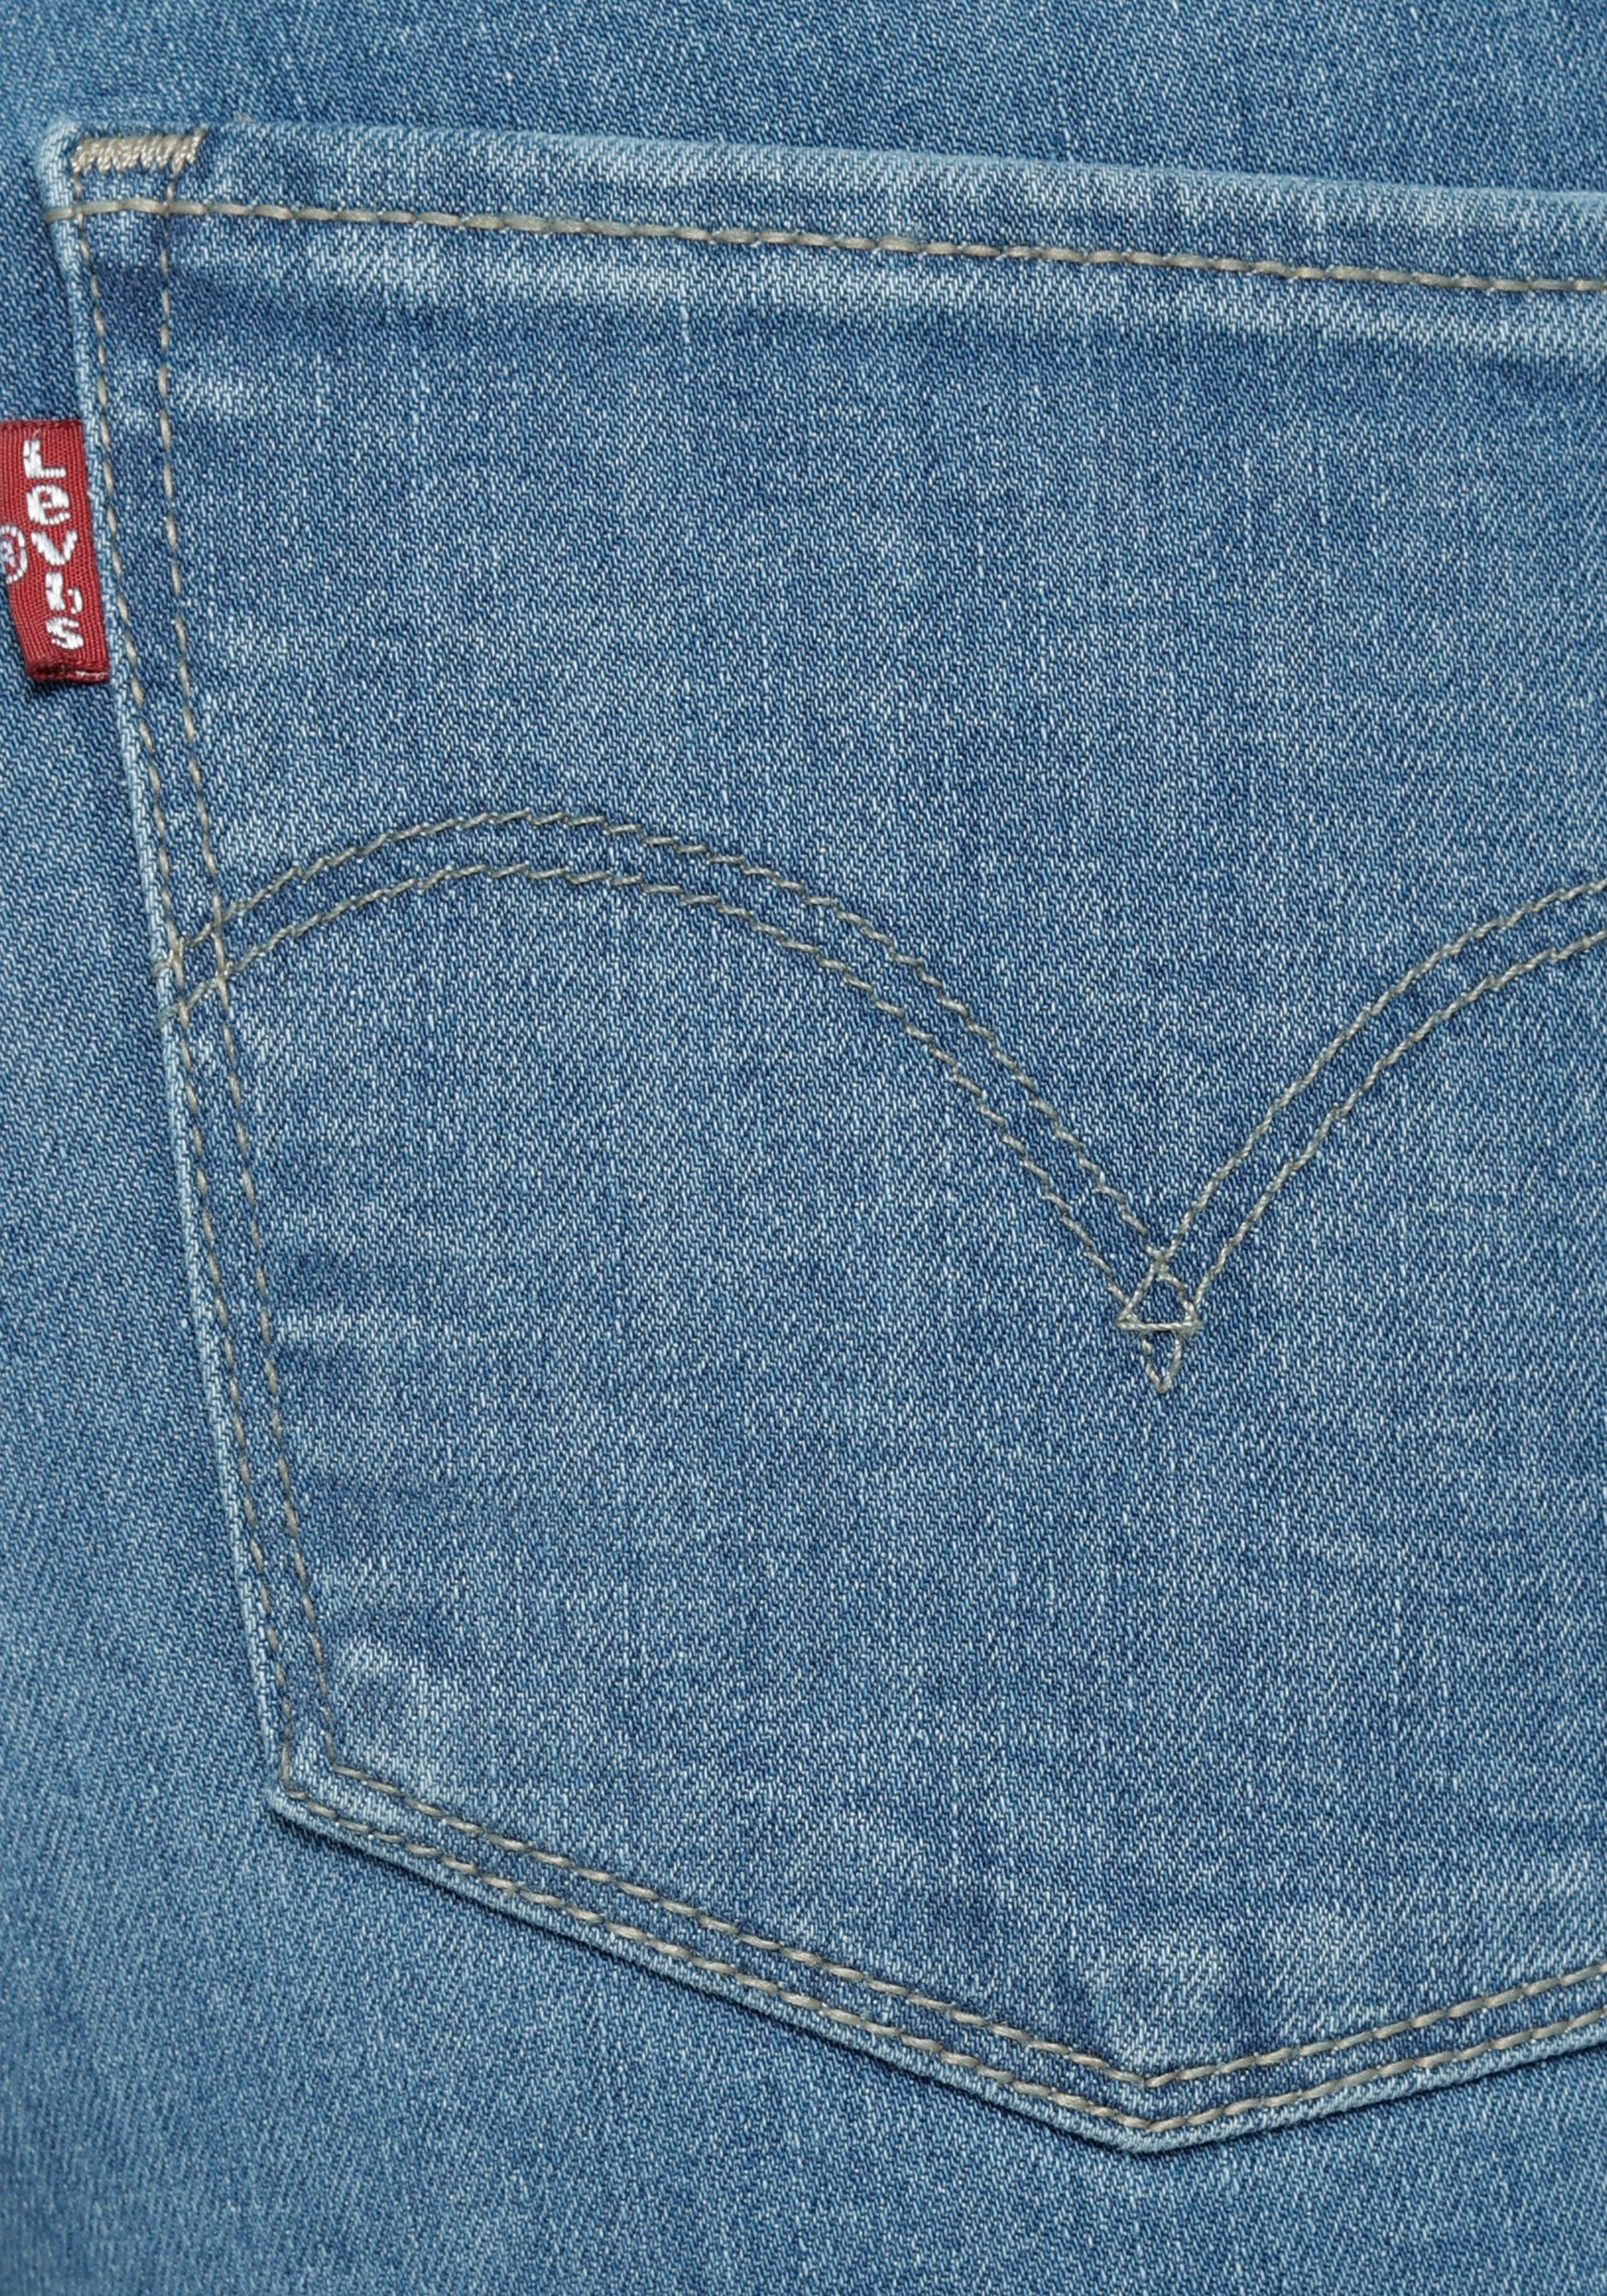 Skinny Super Skinny-fit-Jeans 310 Levi's® Shaping blue-used